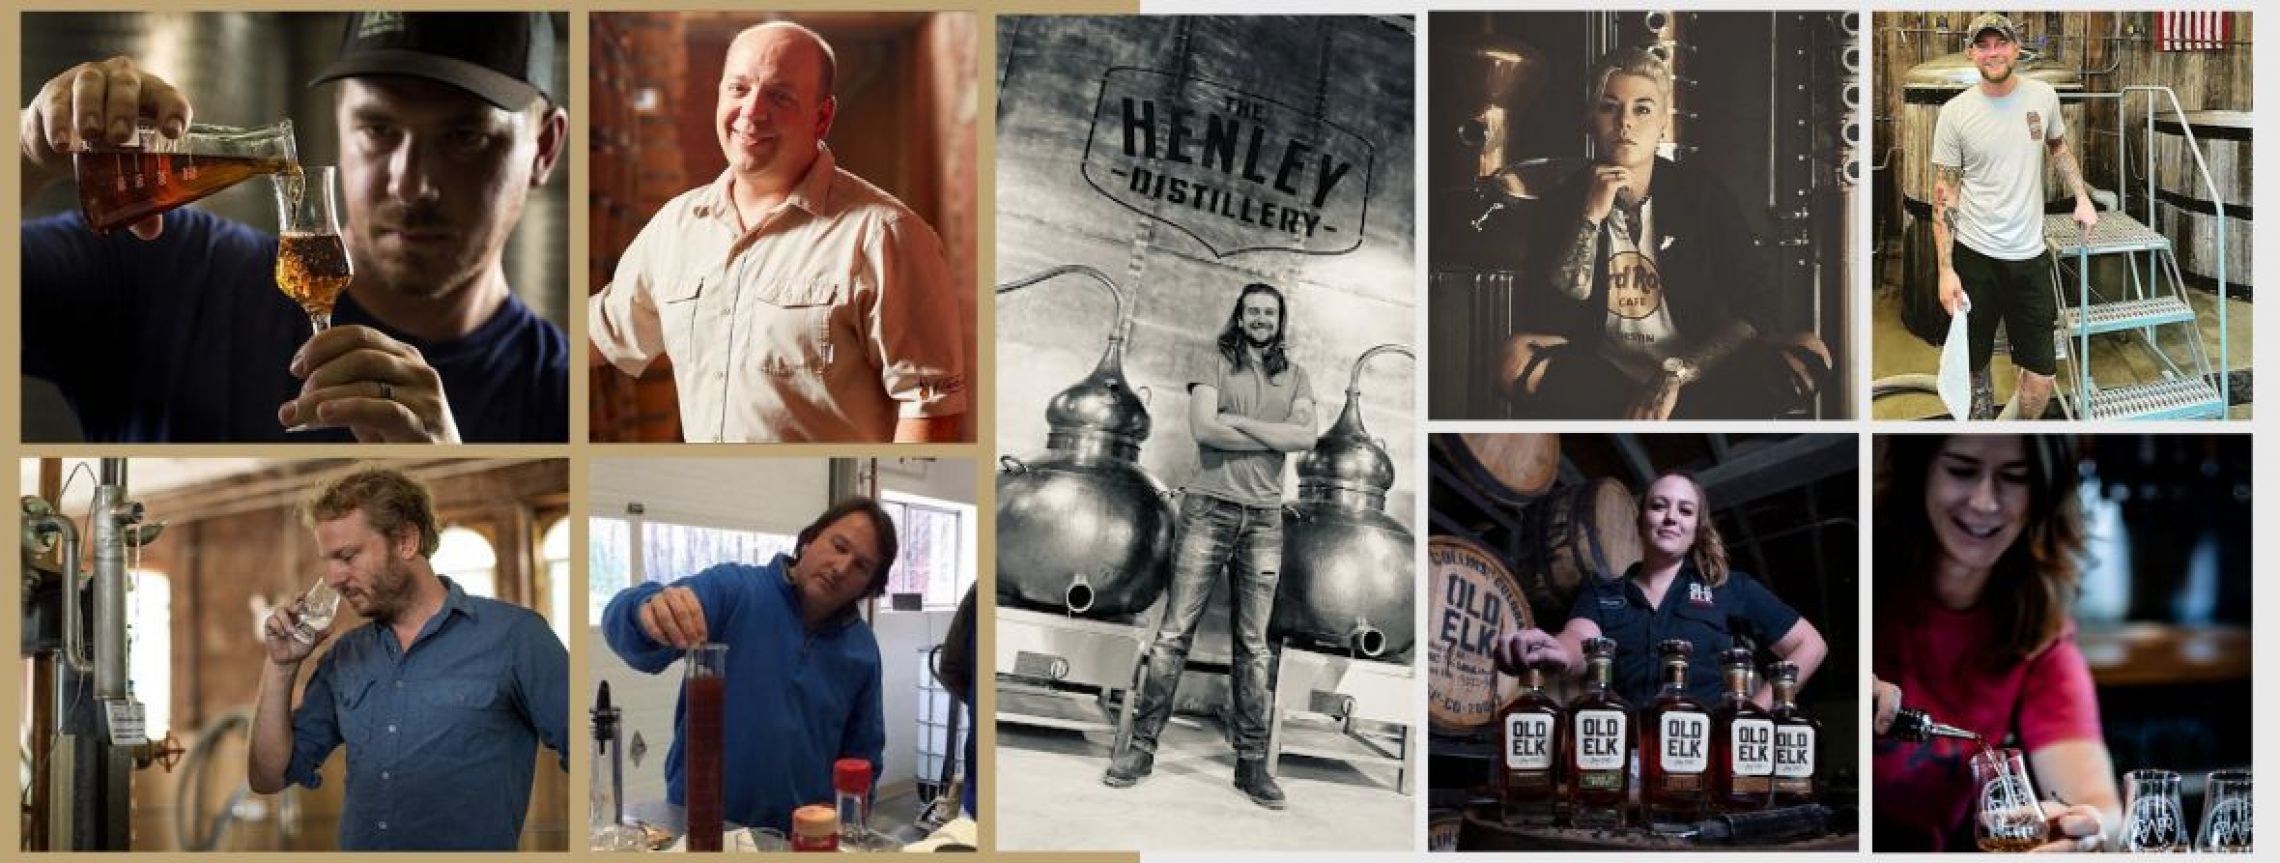 Photo for: A Look Into 9 Distillers and Their Day-to-Day Roles & Responsibilities